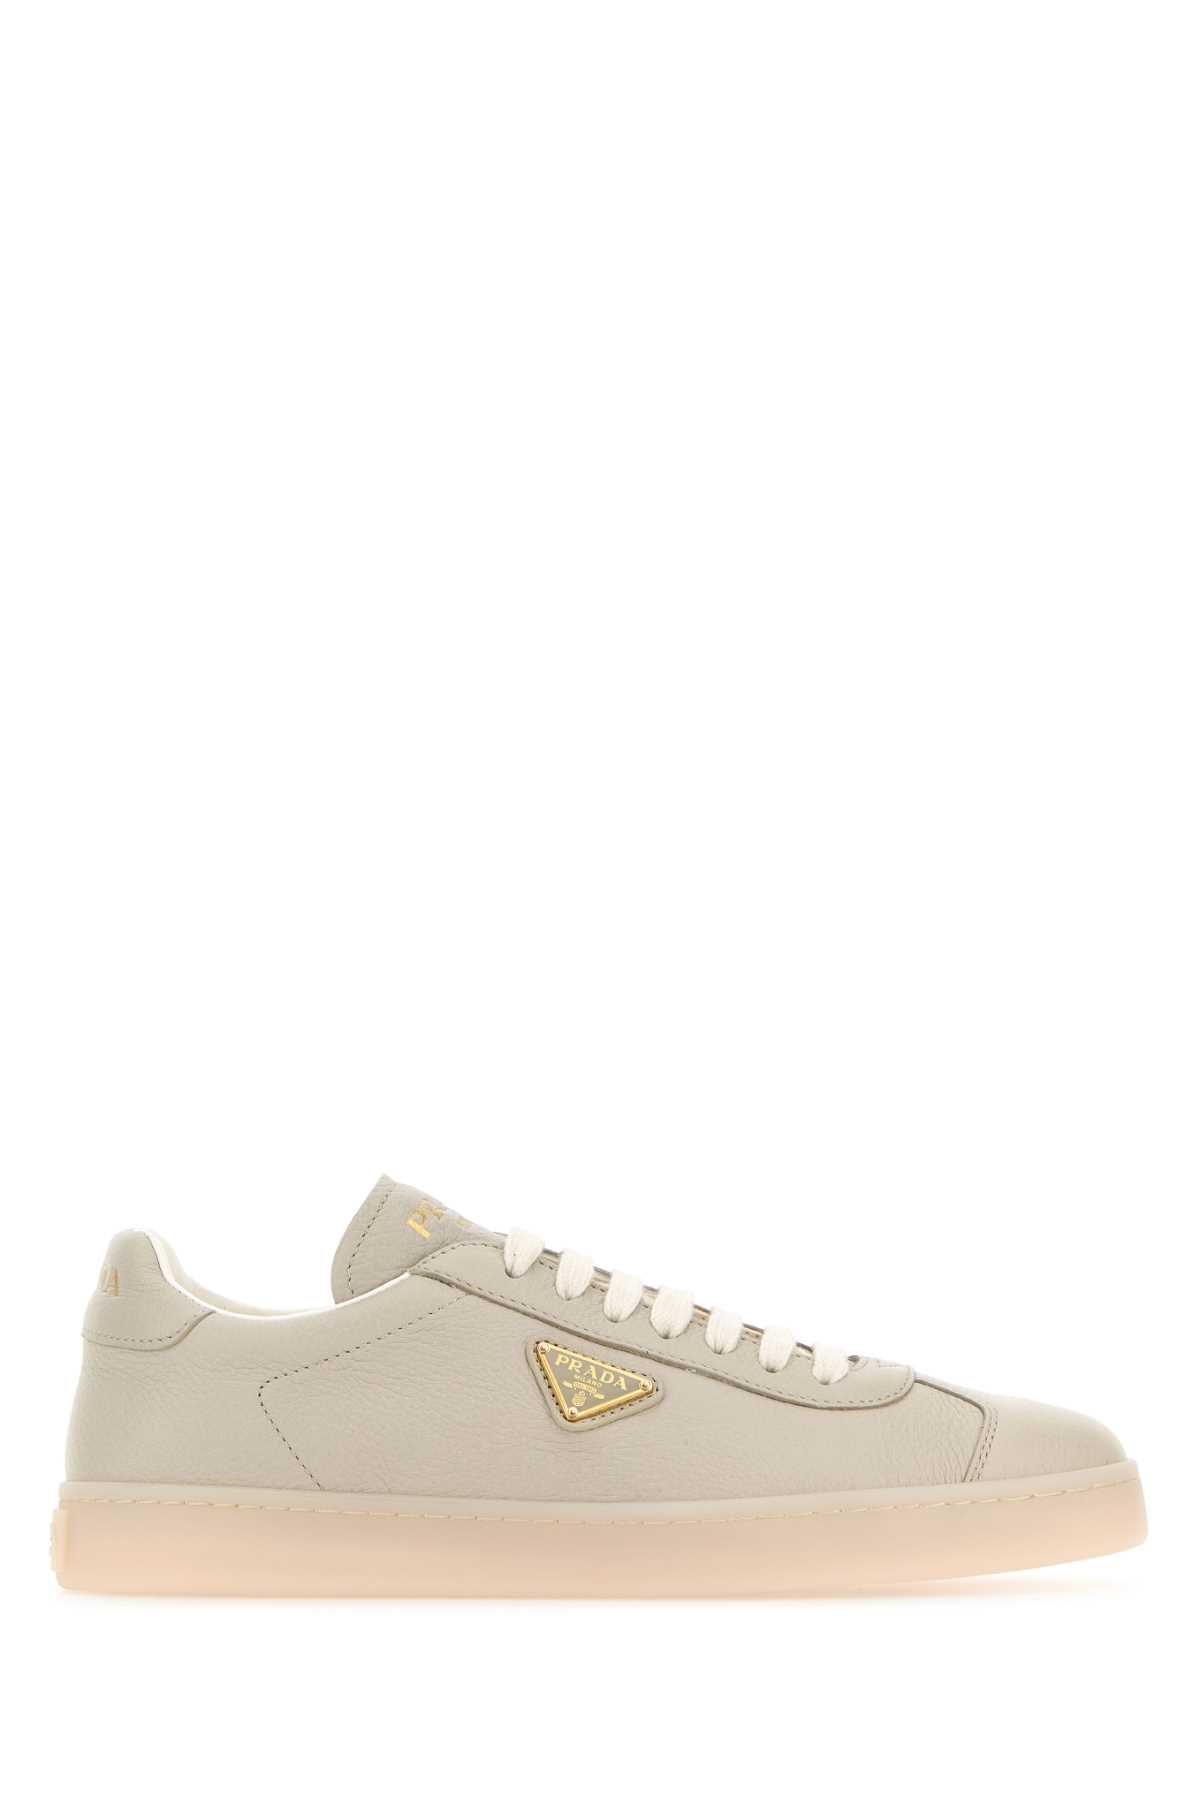 Shop Prada Sand Leather Downtown Sneakers In Pomice